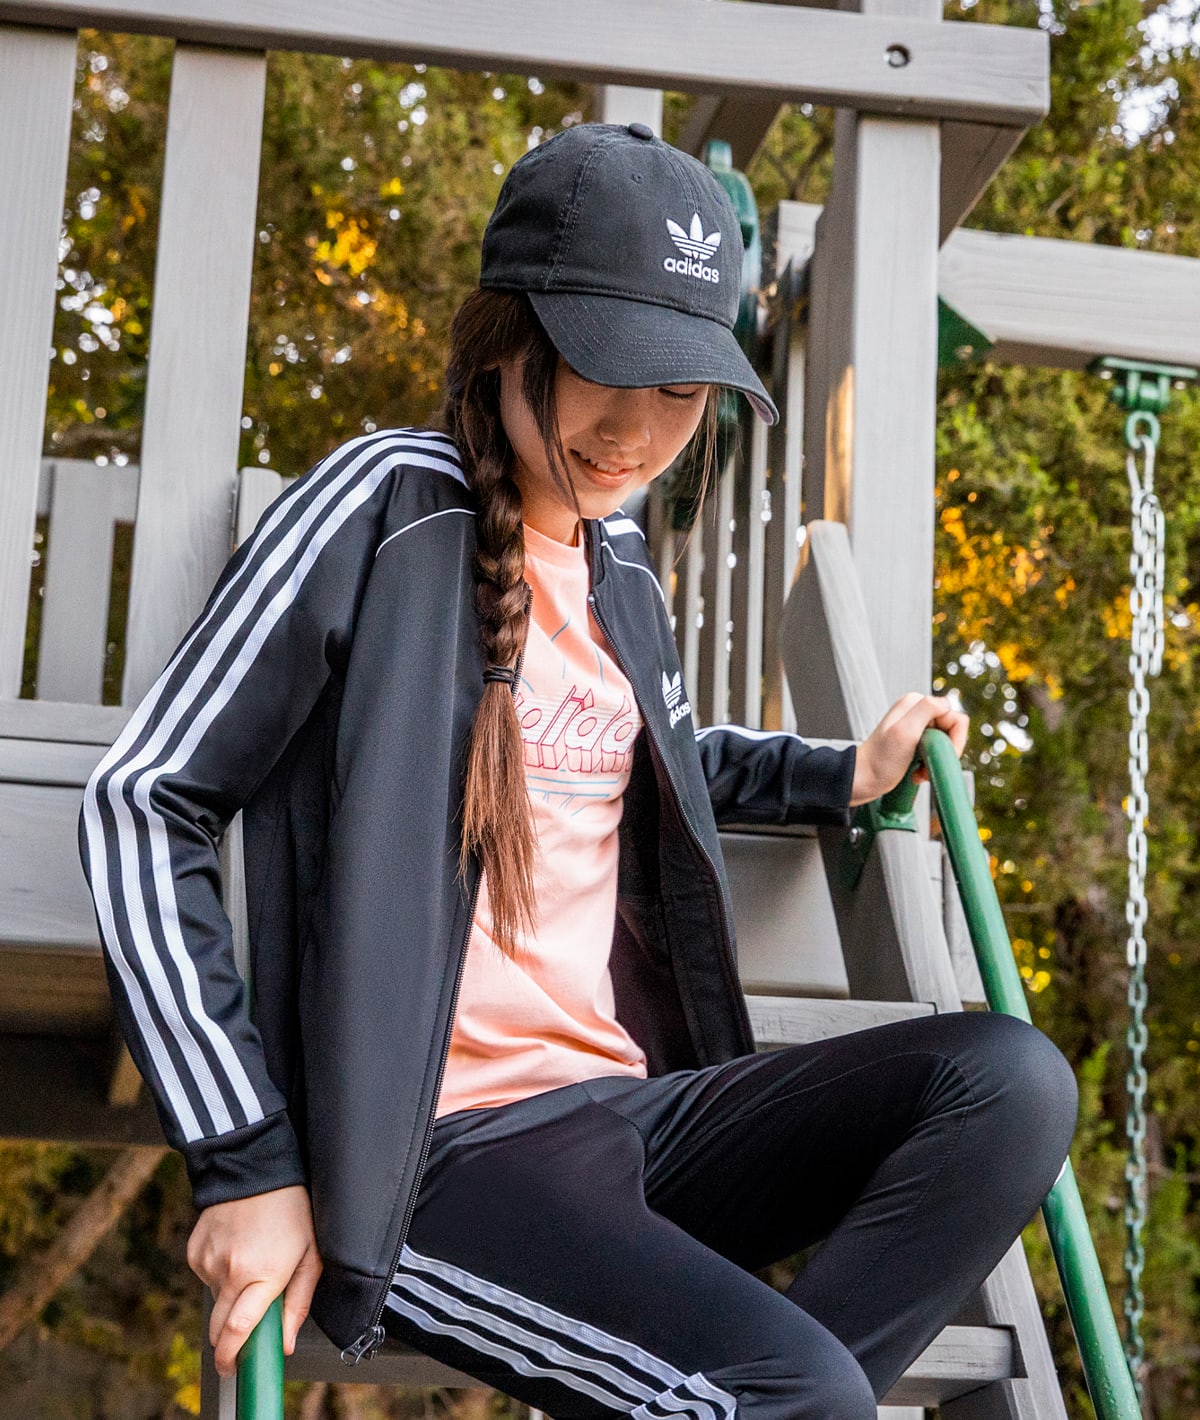 ADIDAS BACK TO SCHOOL OUTFITS FOR GIRLS